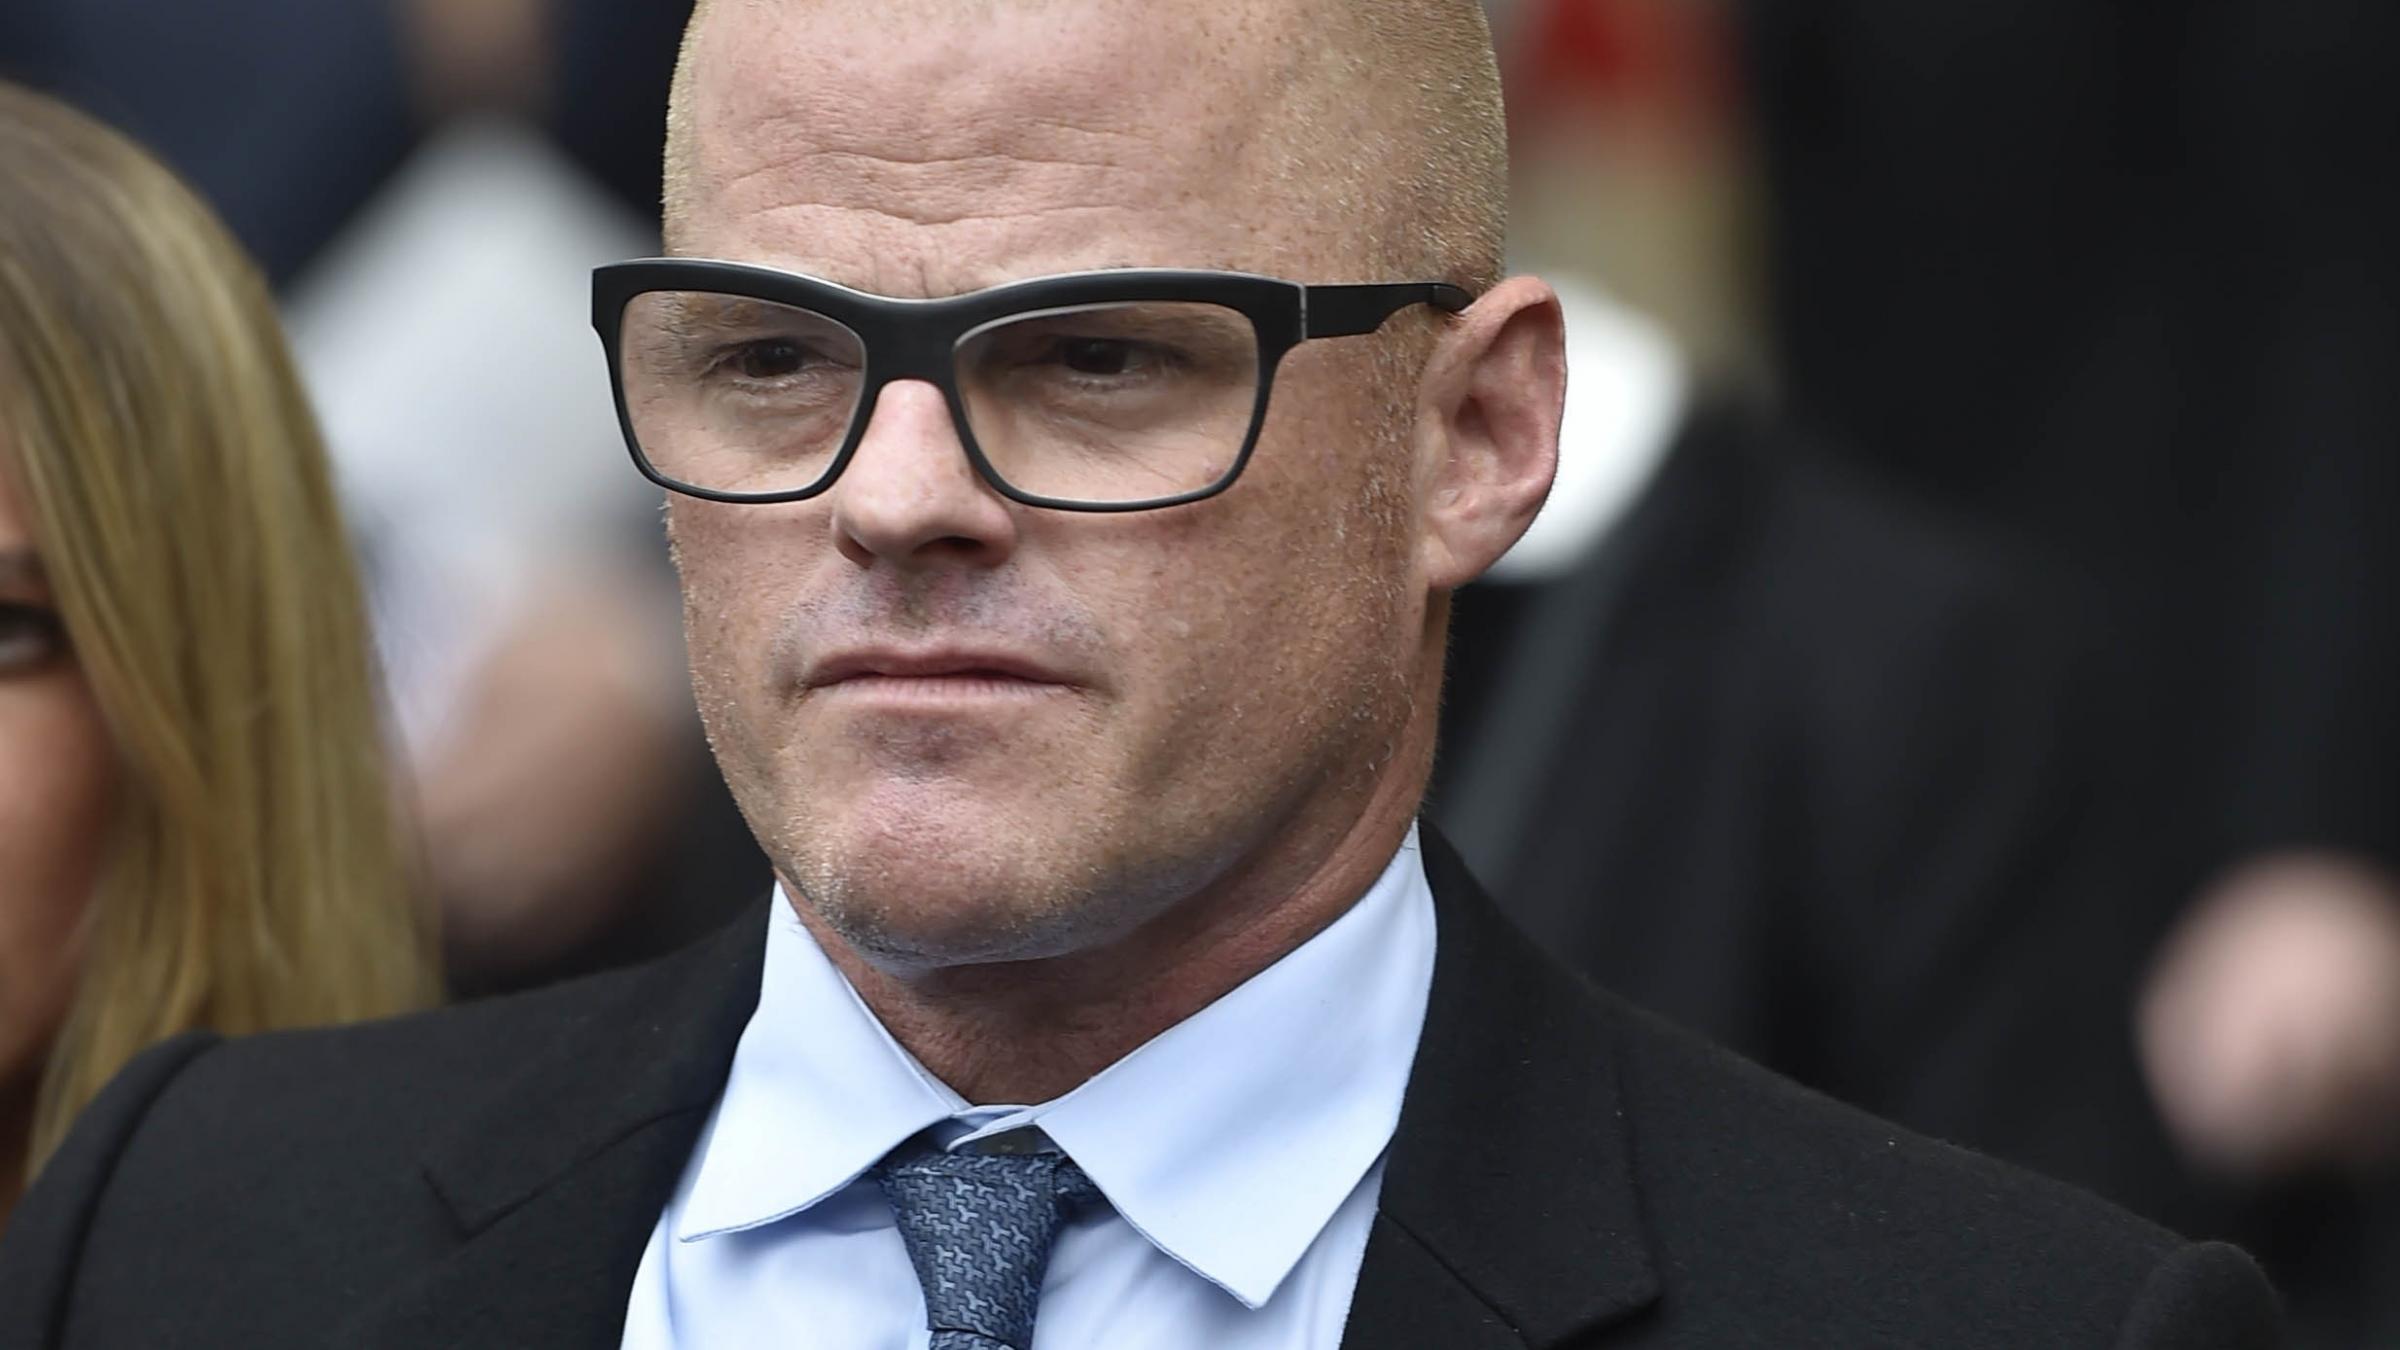 Heston Blumenthal's divorce due after 28 years of marriage